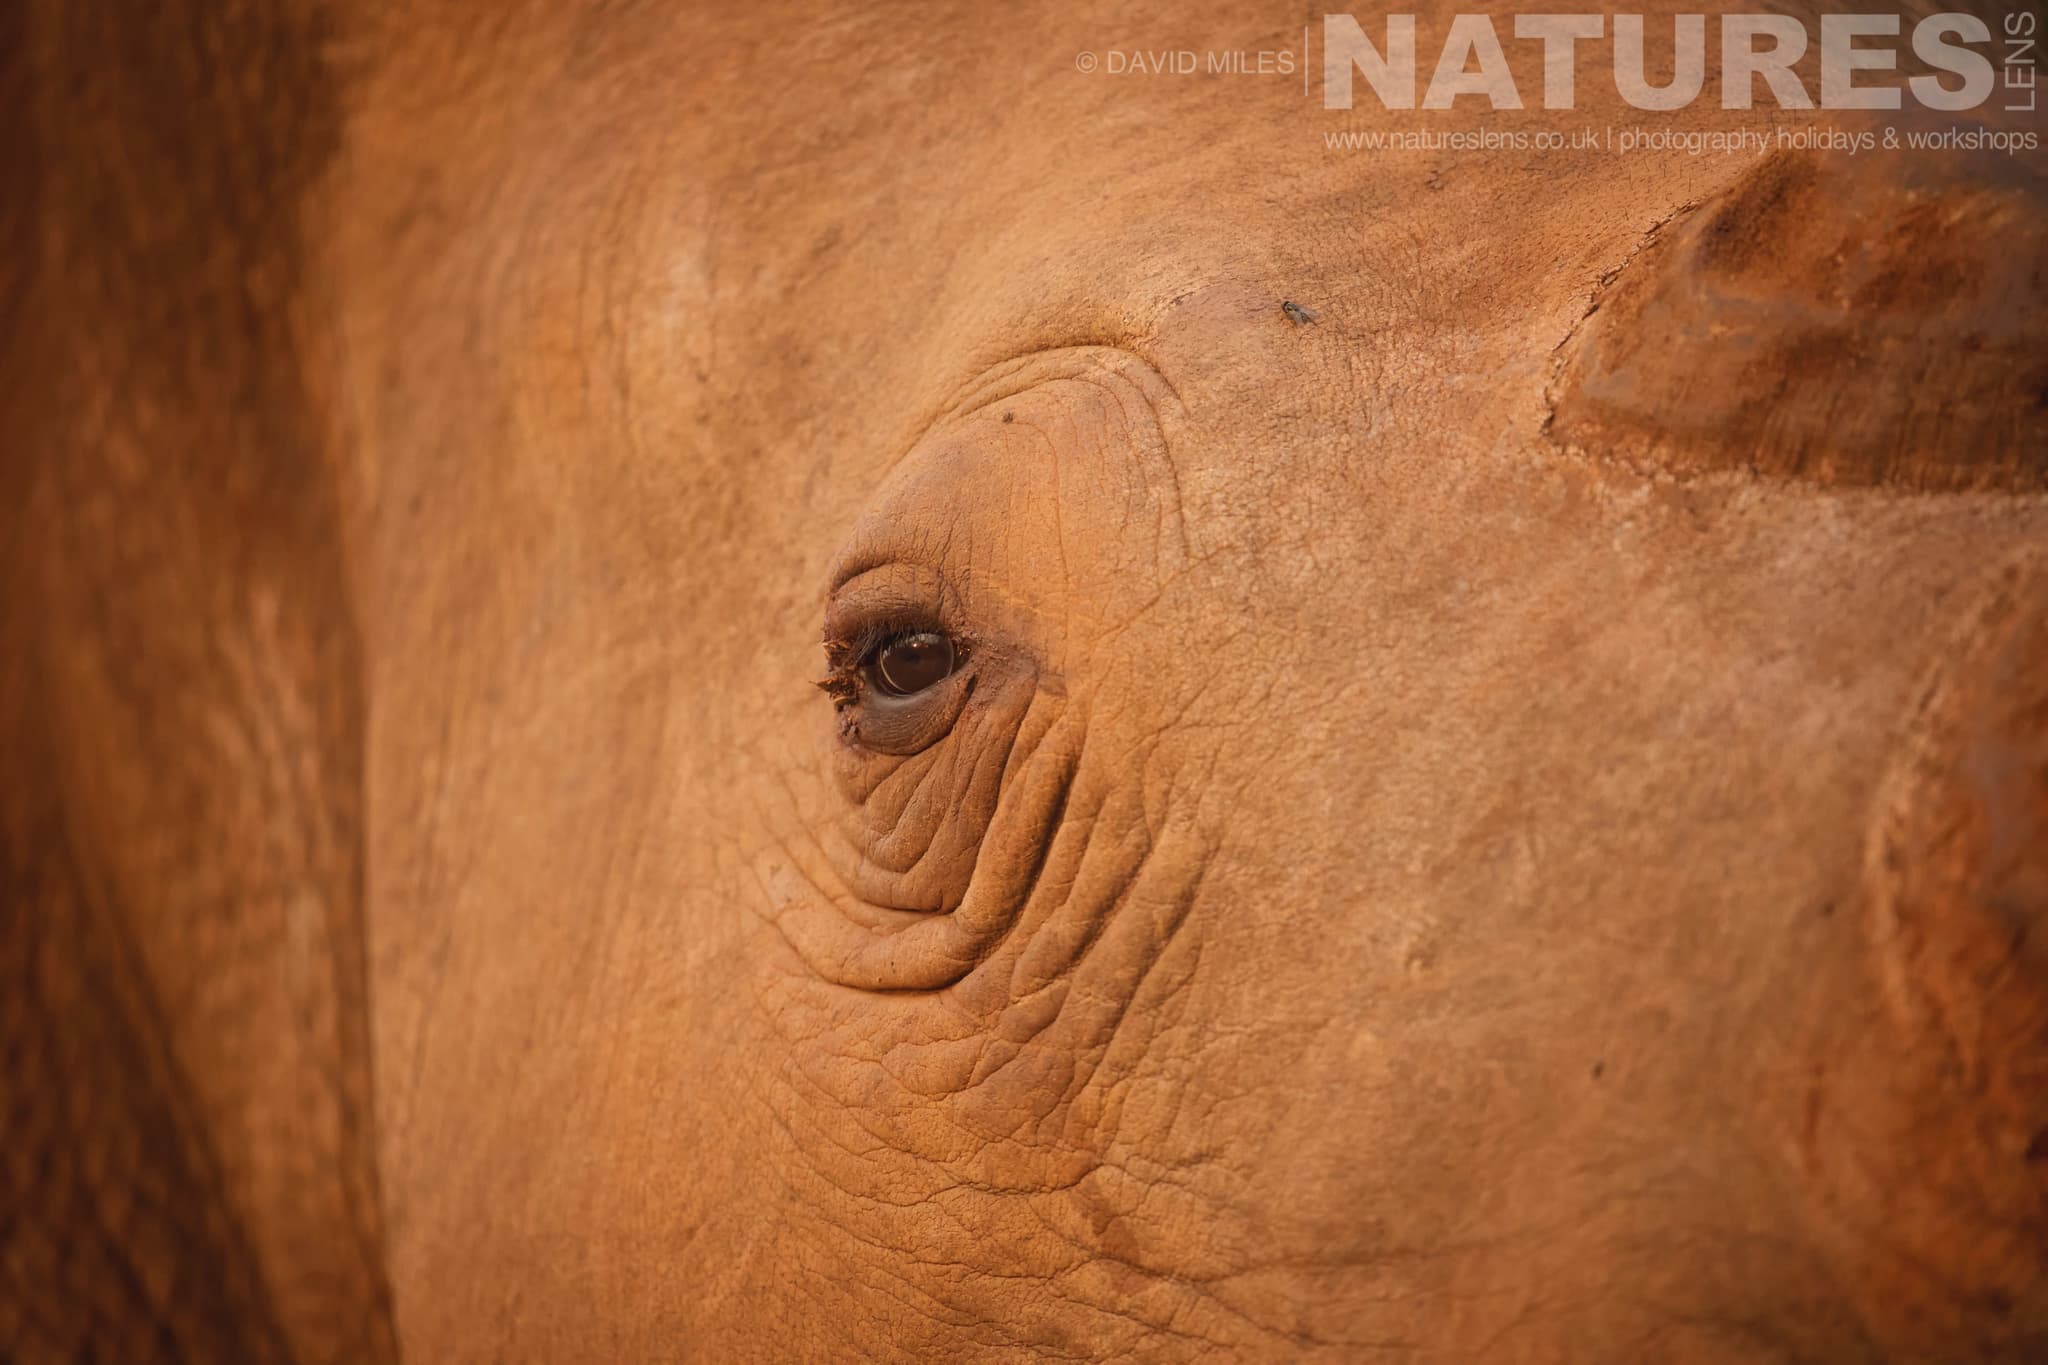 A Closeup Of A White Rhino Drinking From A Waterhole One Of The Species That Makes Up The Awe Inspiring Wildlife Of Zimanga